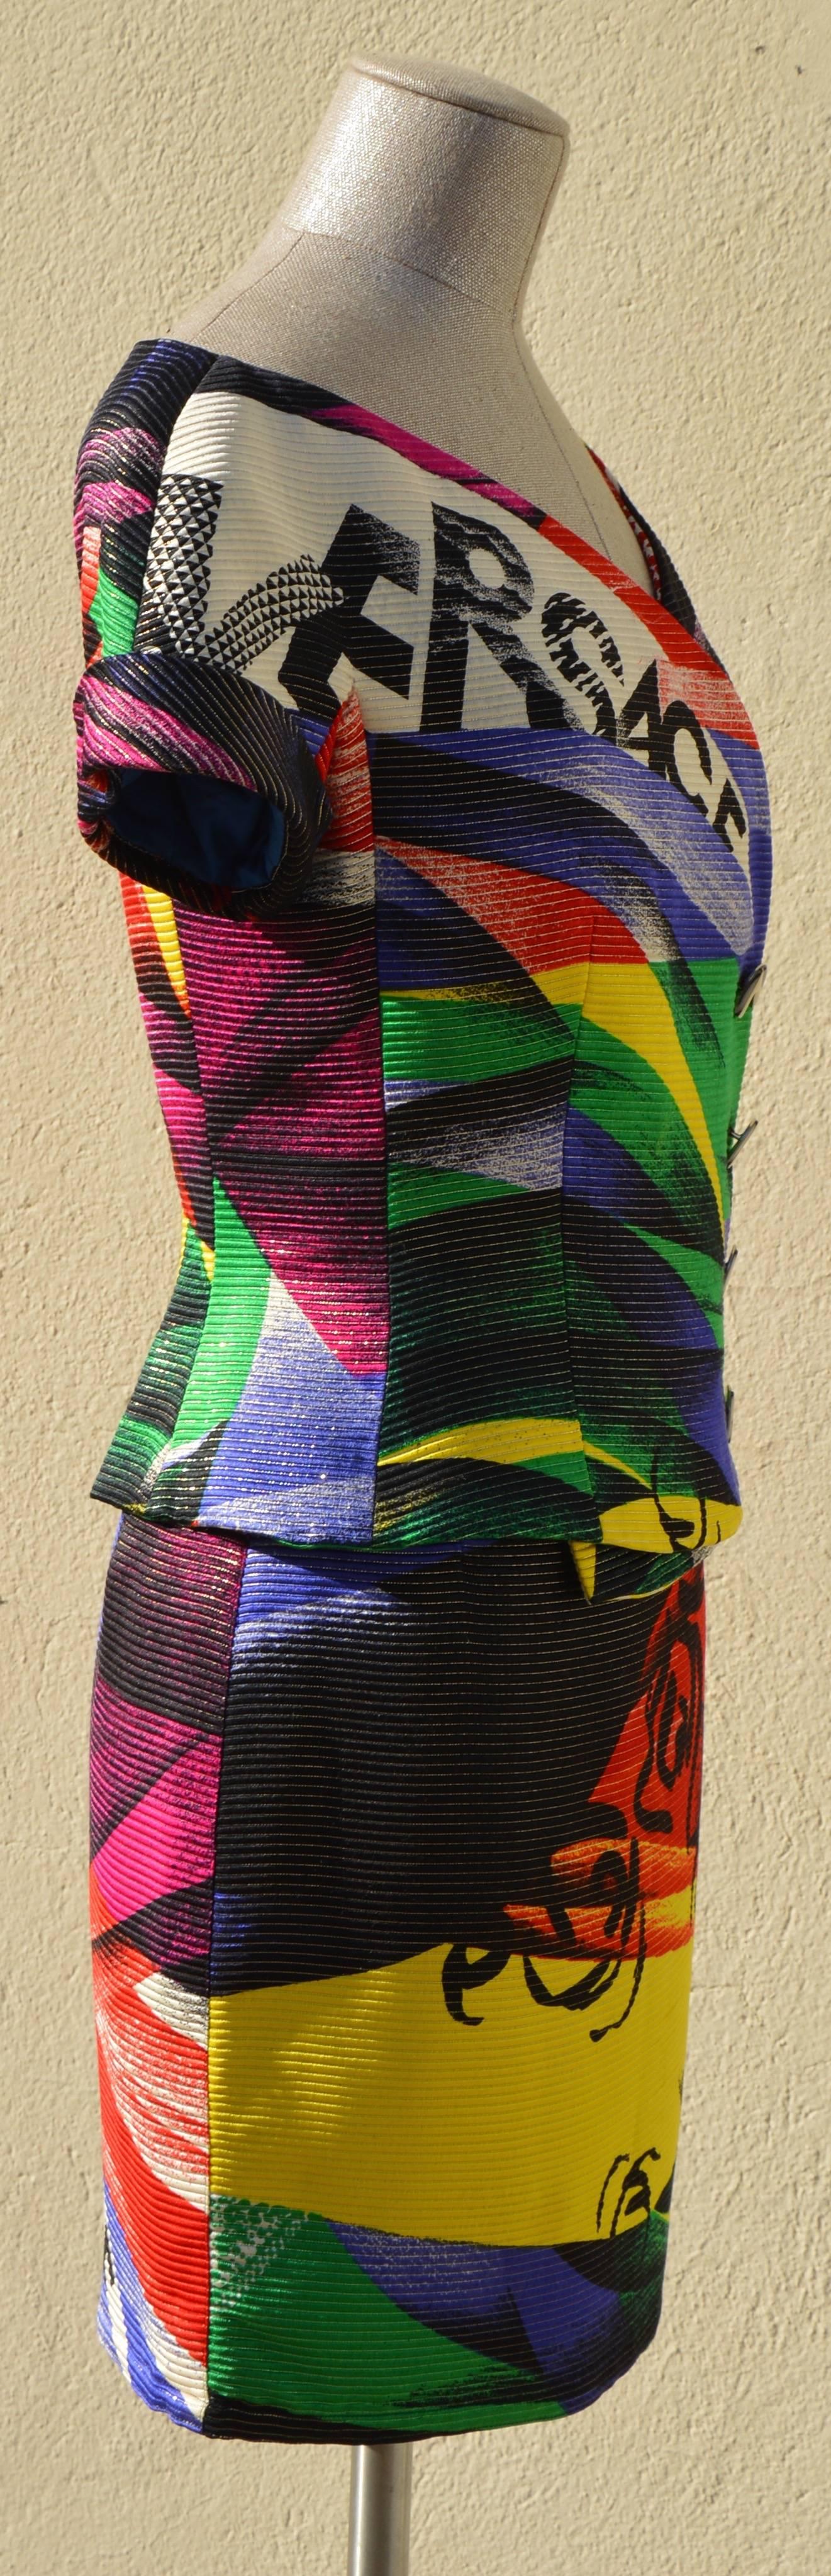 1991 Gianni Versace Graffiti Colorful Skirt Suit Inspired by Chagall's Works 1